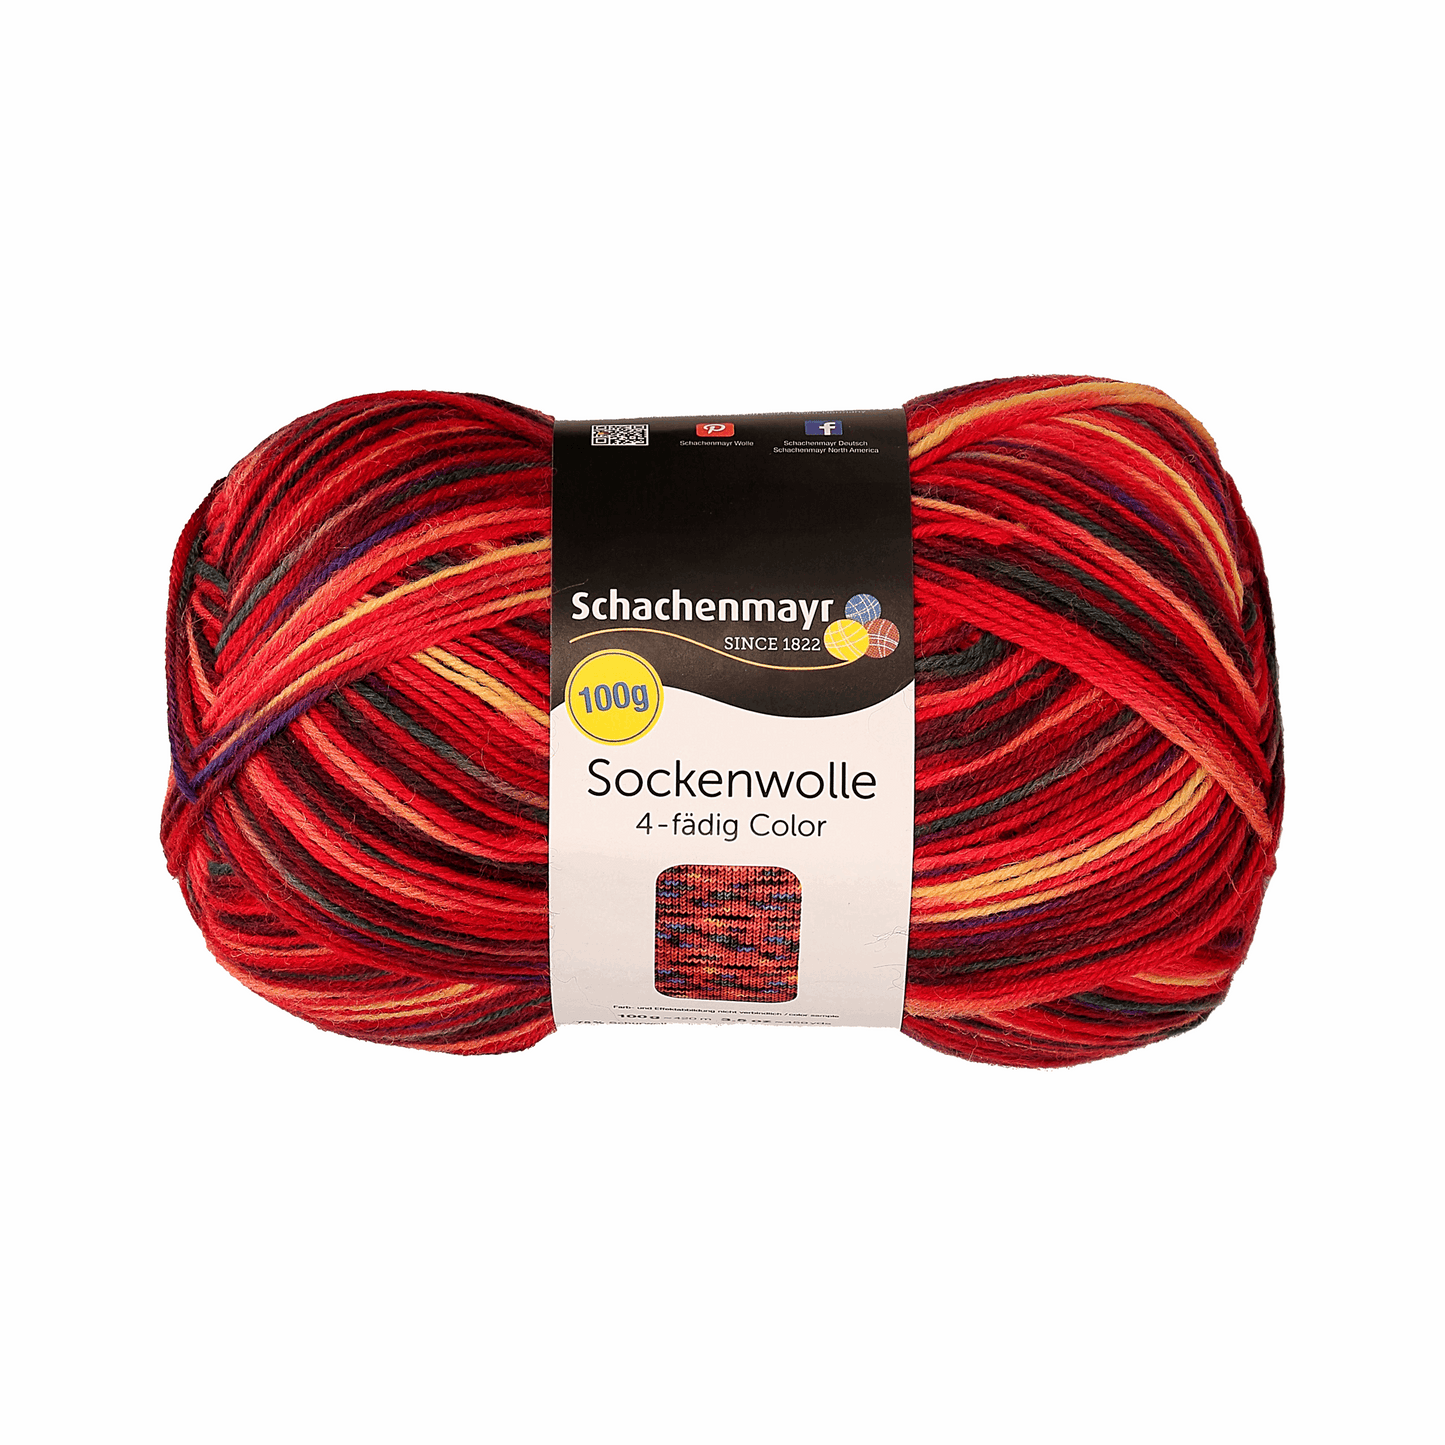 Schachenmayr Sockenwolle Color 100g, 97132, Farbe rot185